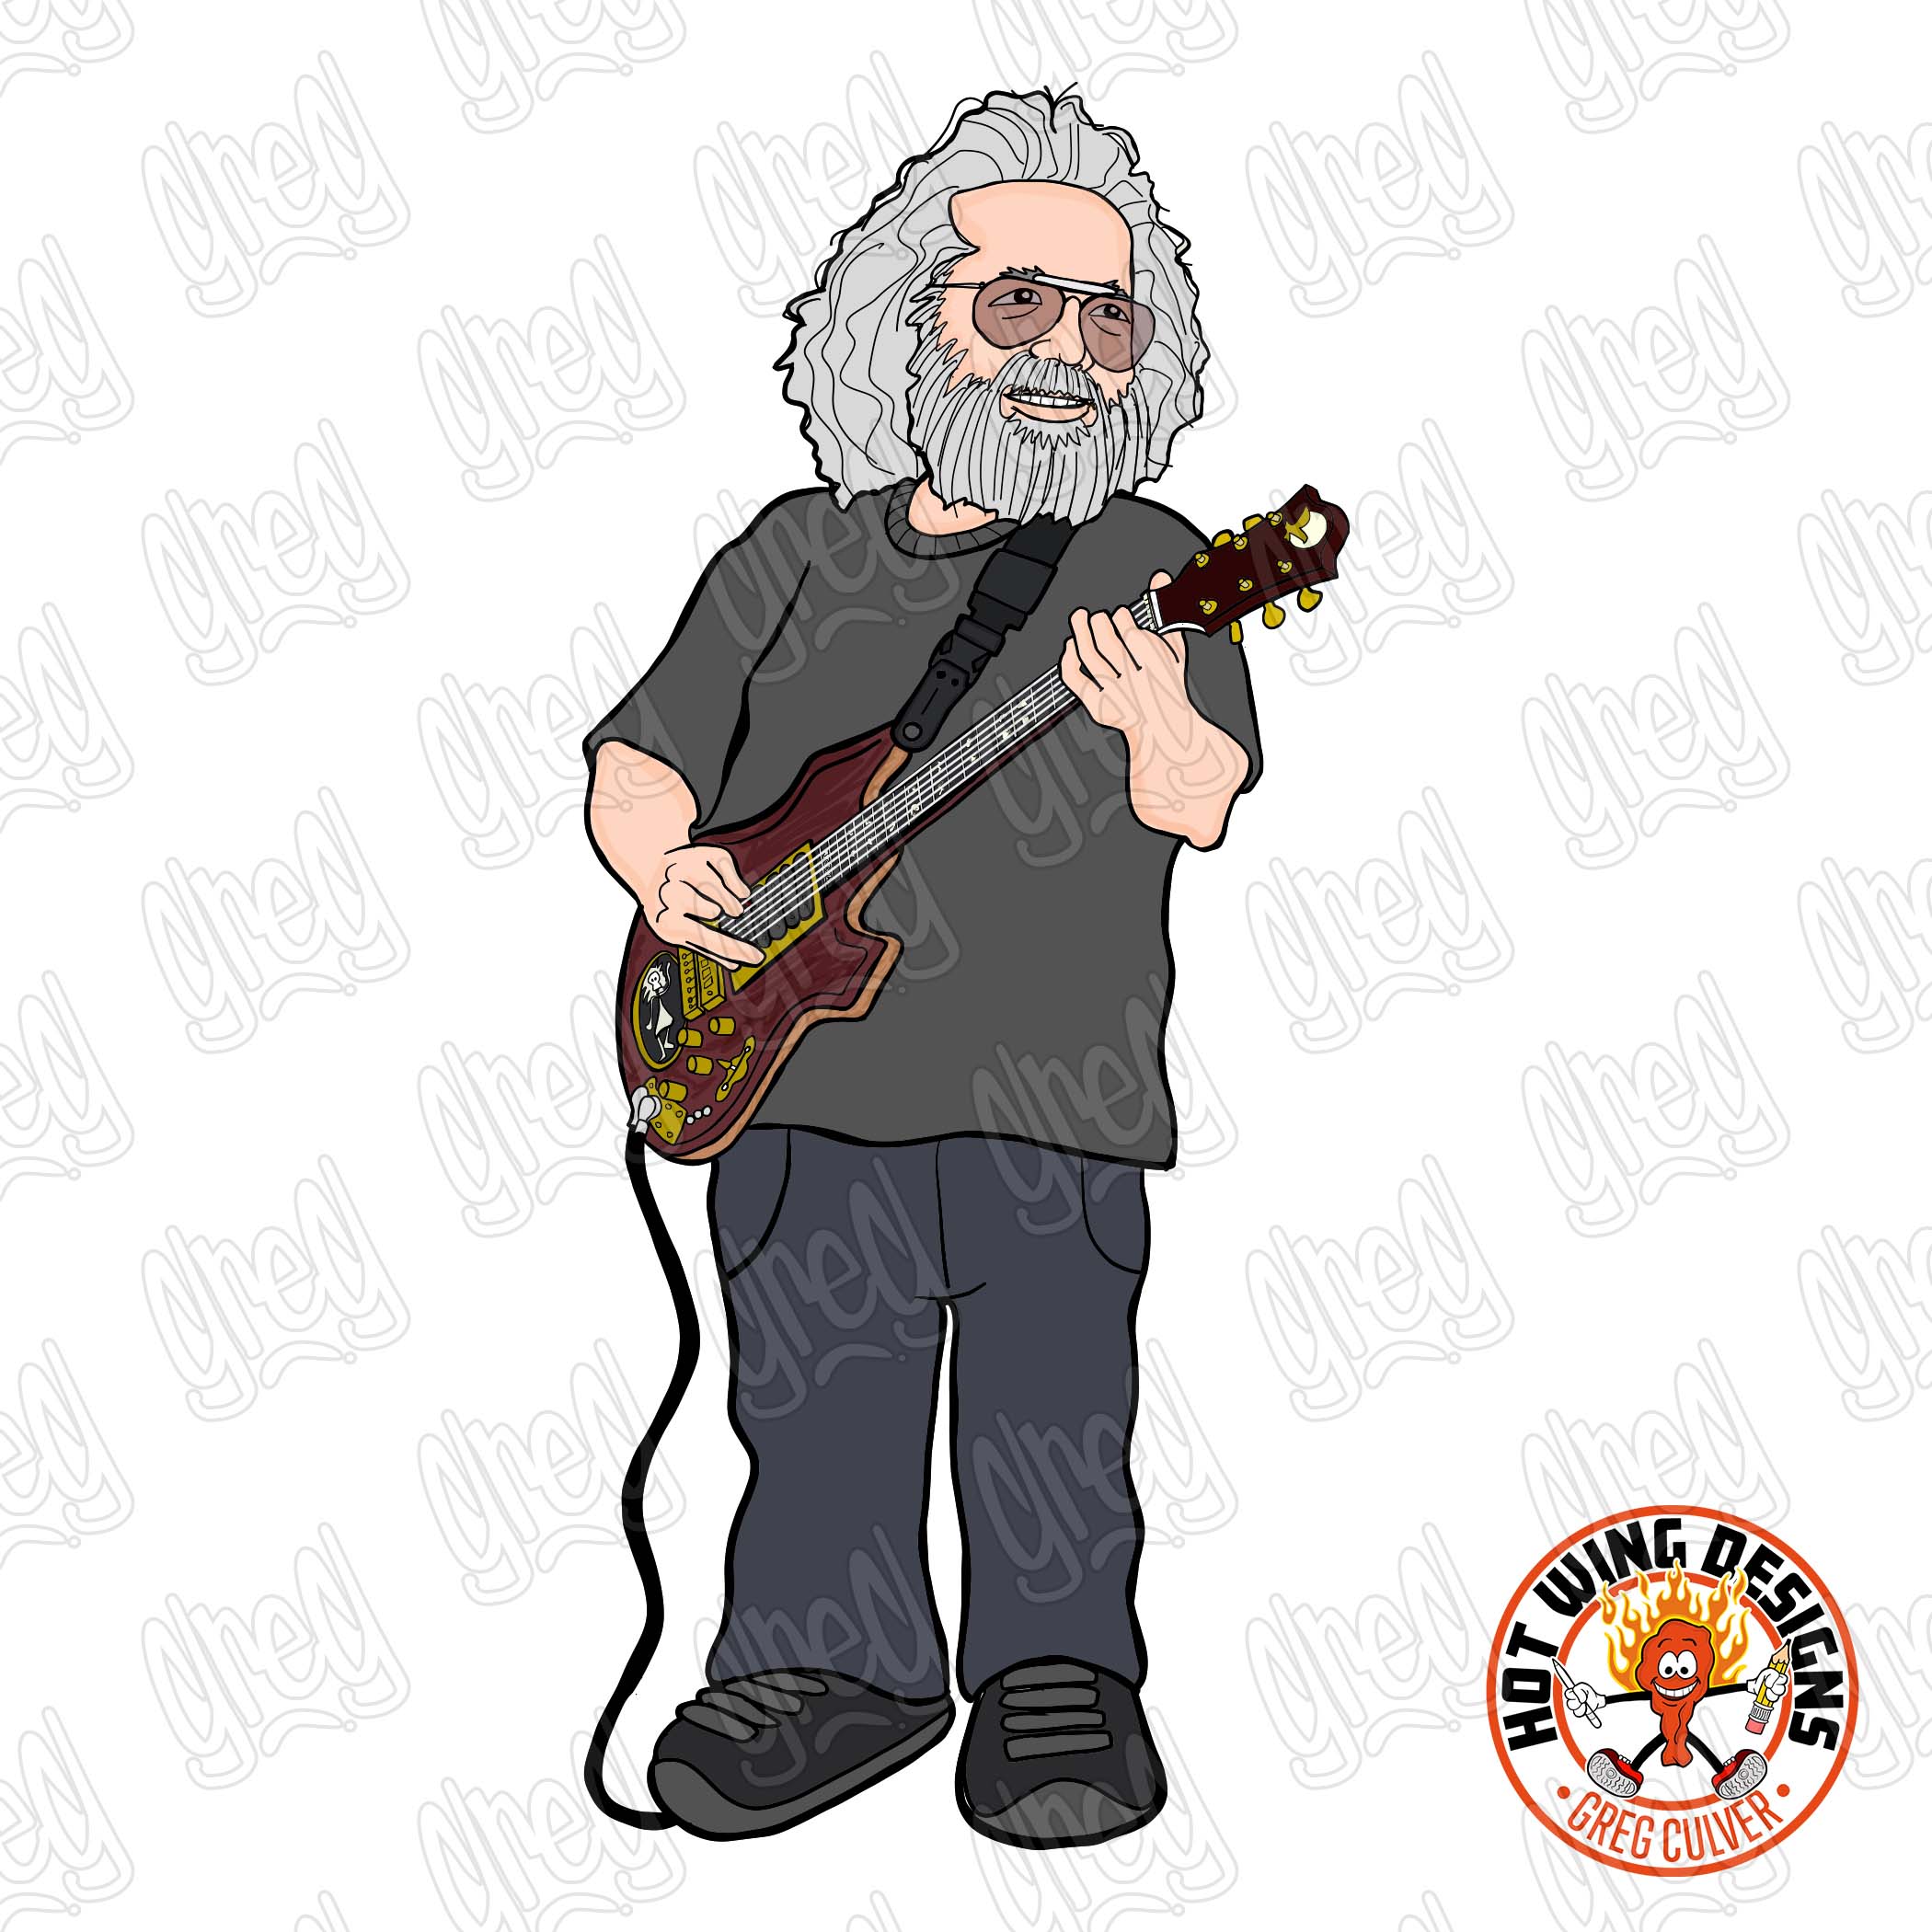 Jerry Garcia cartoon sticker by Greg Culver and Hot Wing Designs